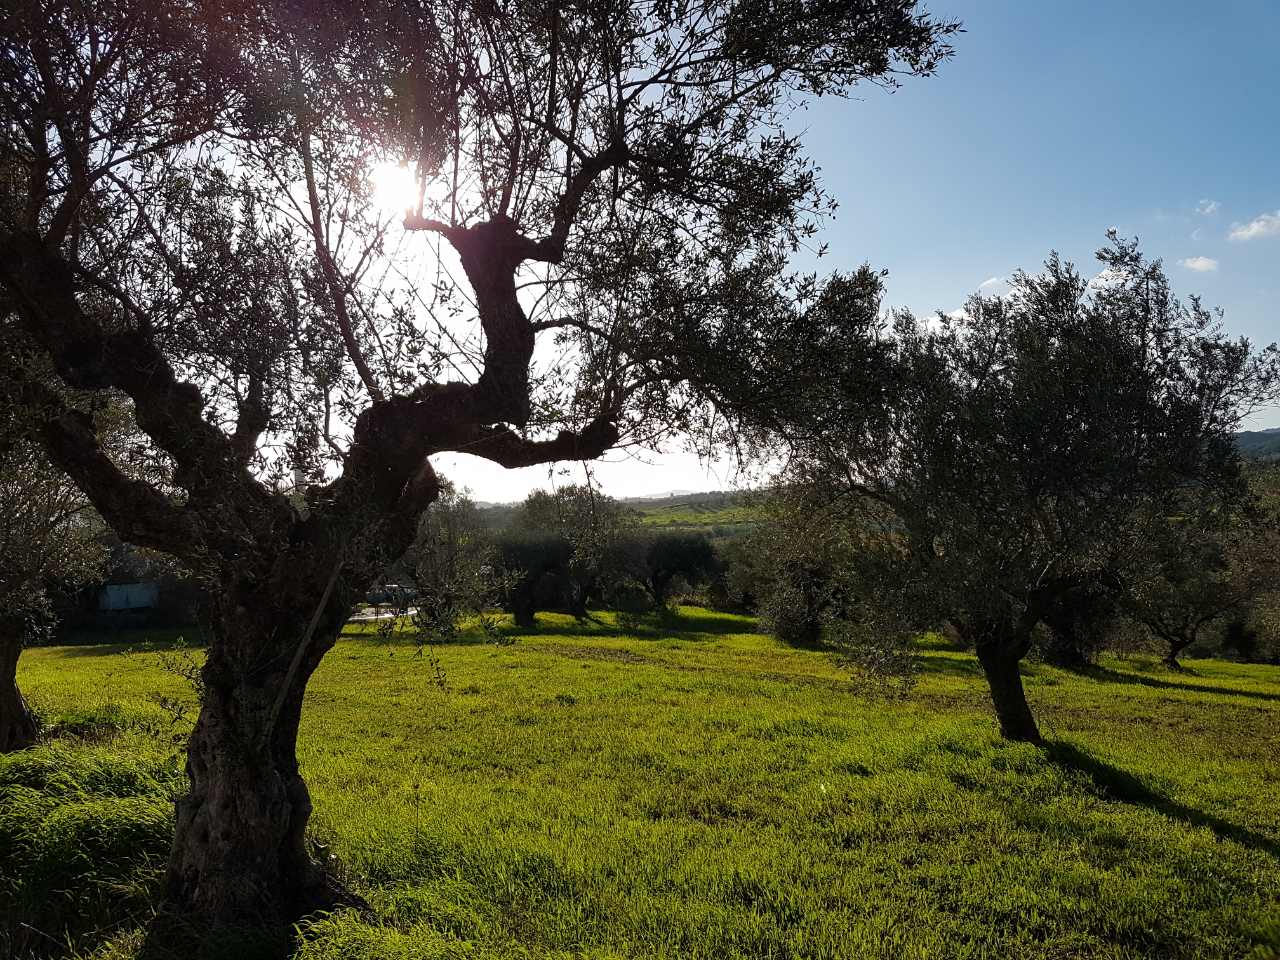 A Mediterranean olive grove on a sunny day in January with green foliage beneath the elegant trees.